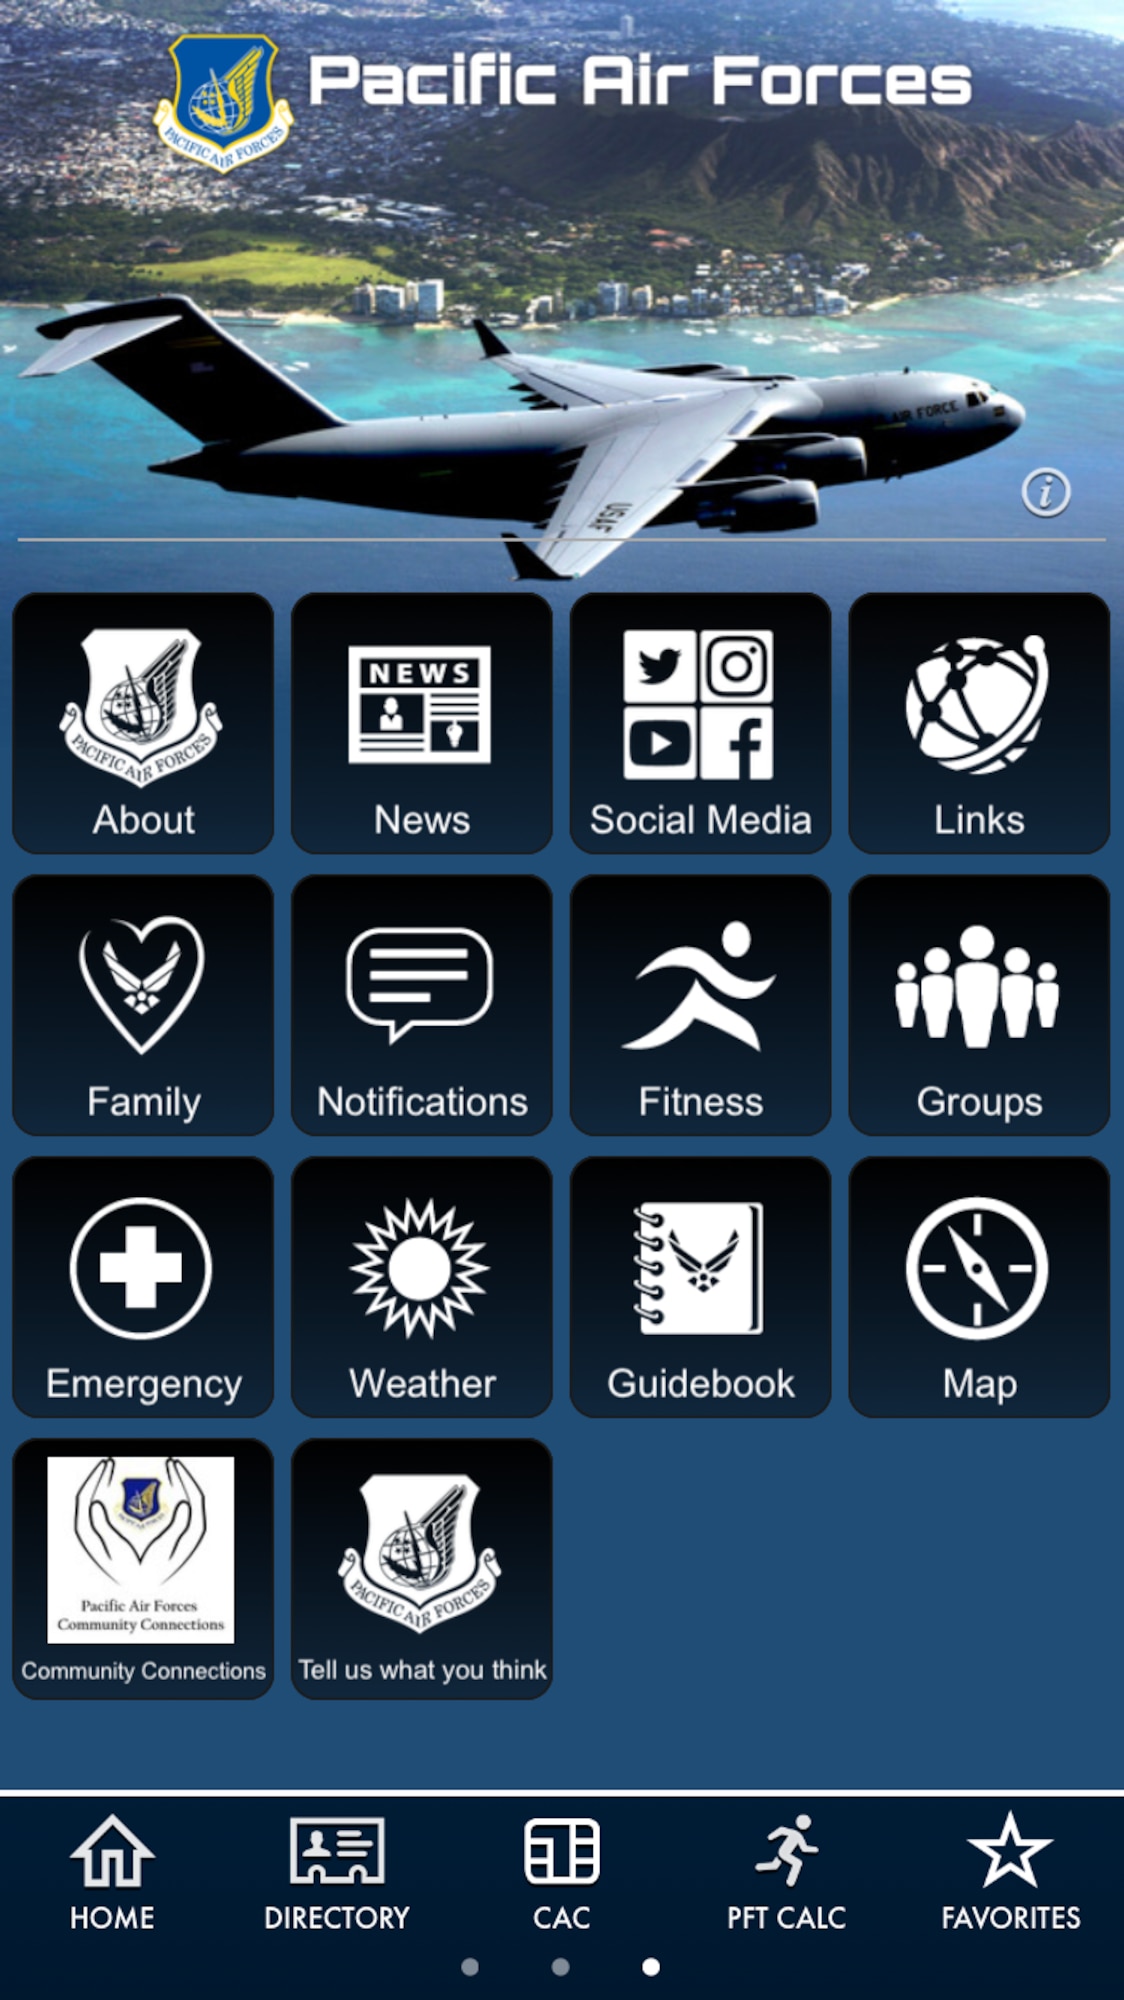 The Pacific Air Forces app is now available on Air Force Connect, the Air Force-wide mobile app. It’s the Air Force’s total force mobile app and is equipped with more than 20 features that are exclusively built and designed to enable, engage, and empower our Airmen across the globe. (U.S. Air Force photo by Staff Sgt. Mikaley Kline)